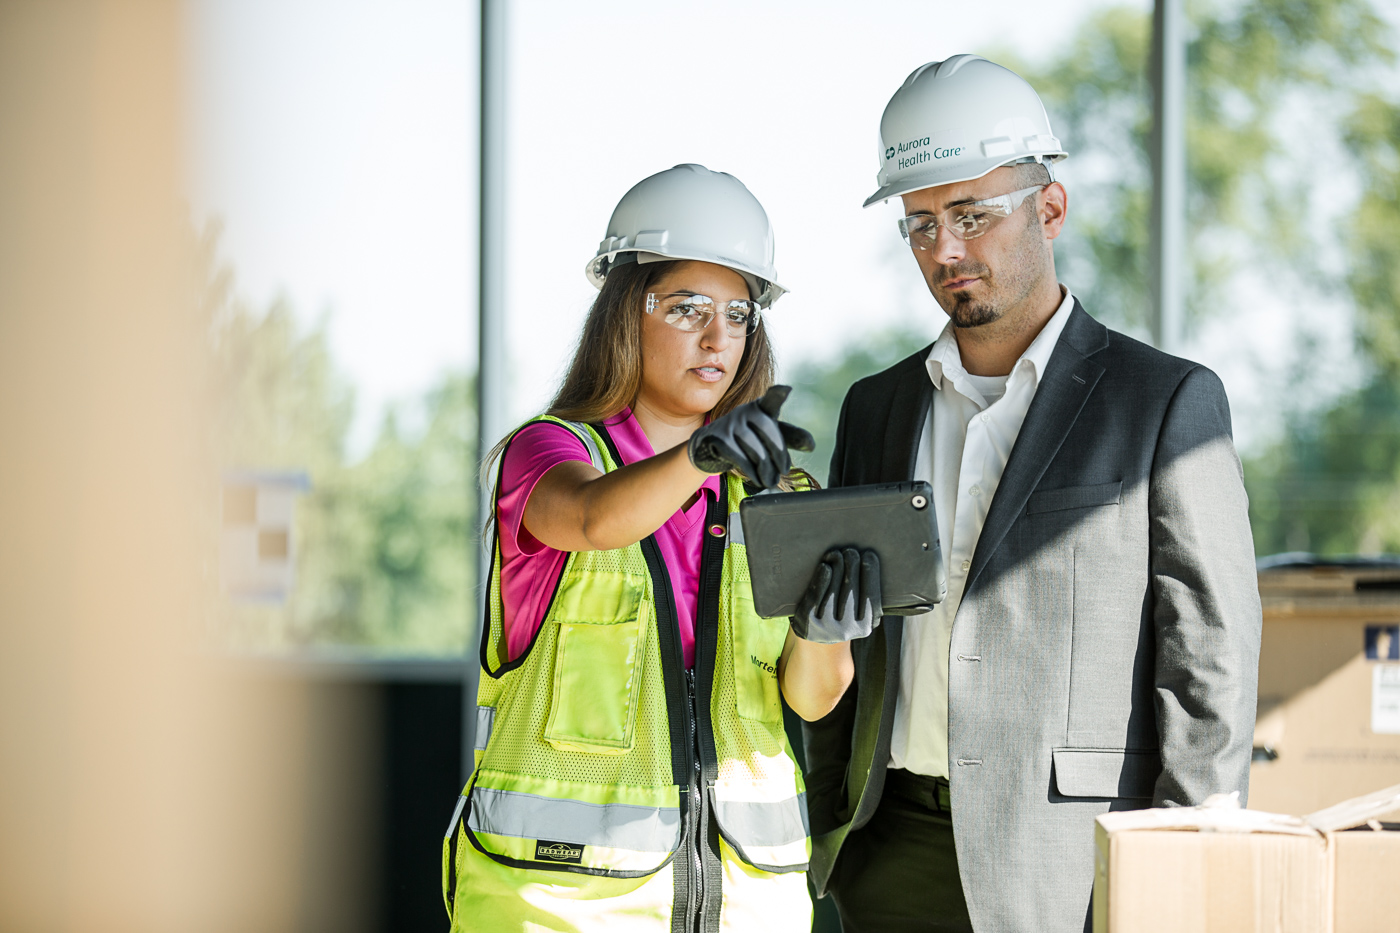 commercial photographer Midwest - a construction worker and a client talk on a construction site